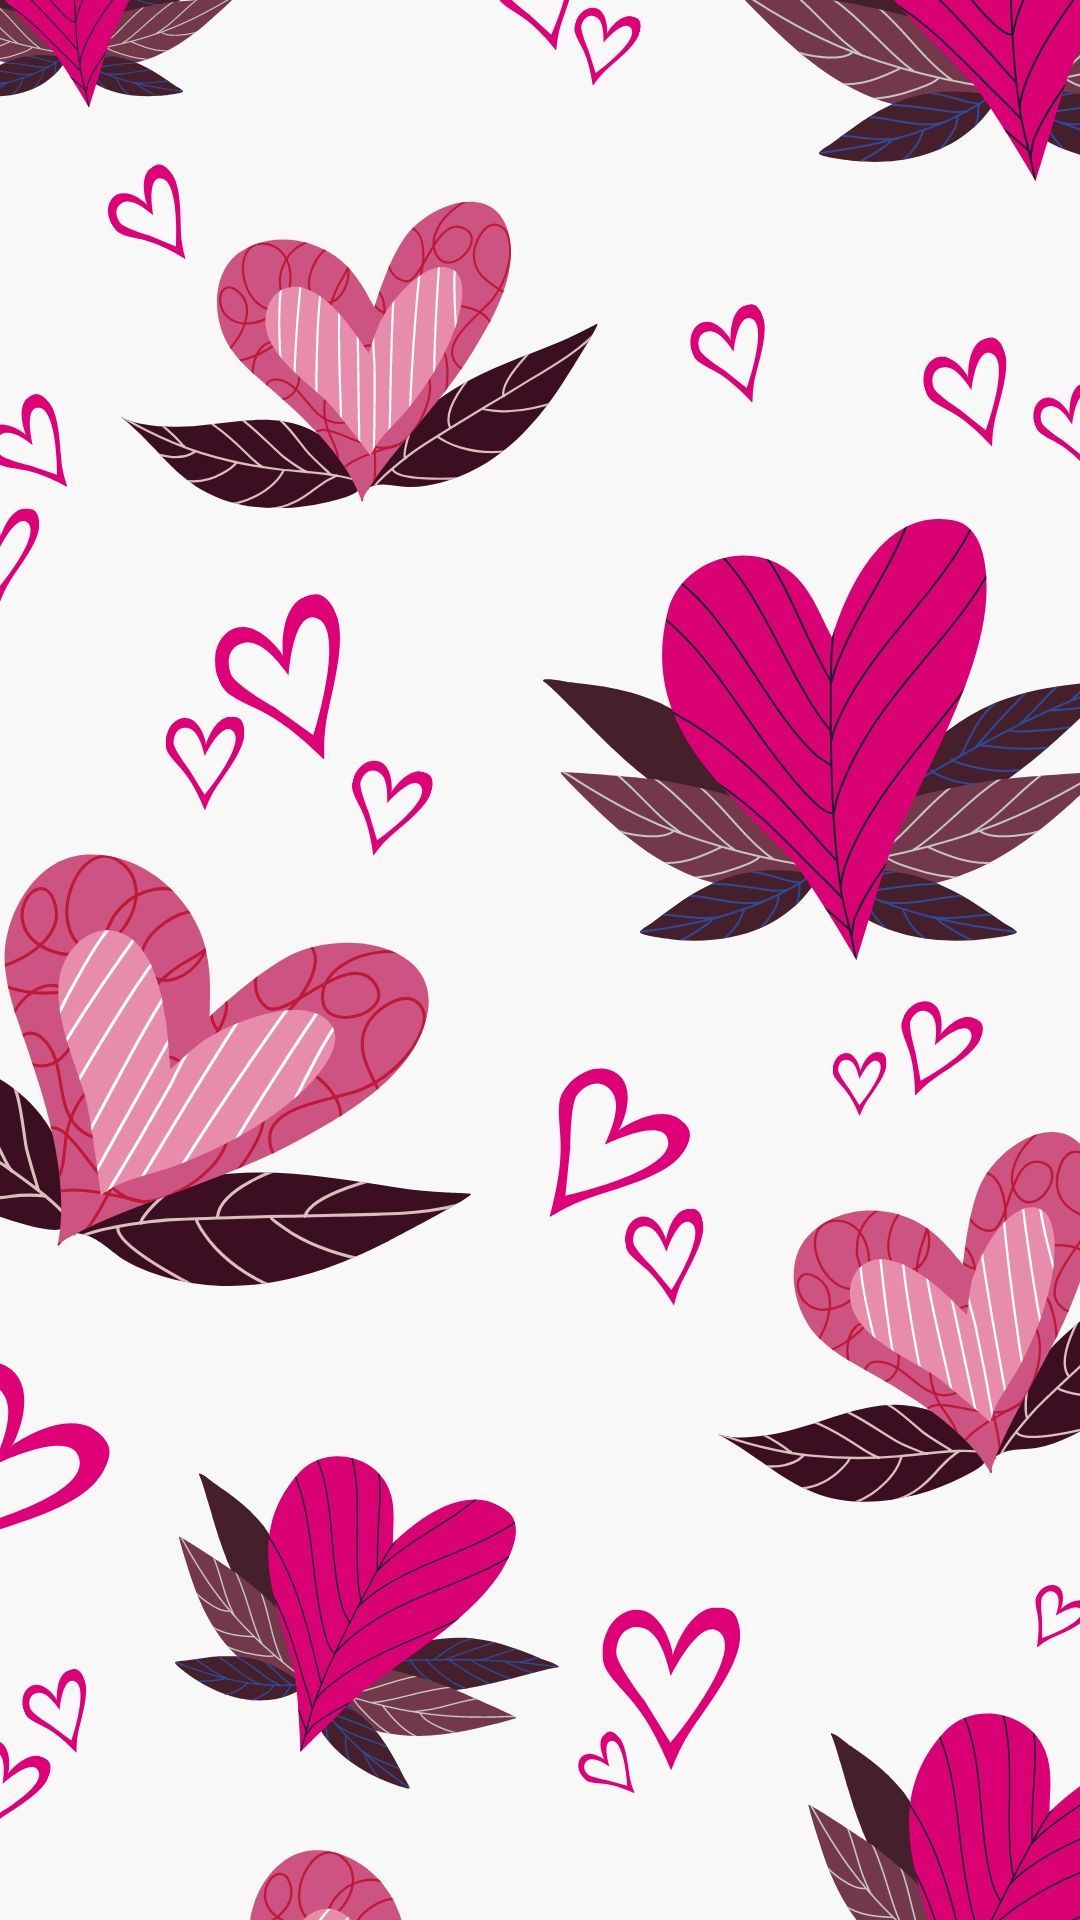 Grab these adorable Valentine's iPhone Backgrounds and Best Valentines Day Wallpaper for February or anytime you have Love on Your Mind!